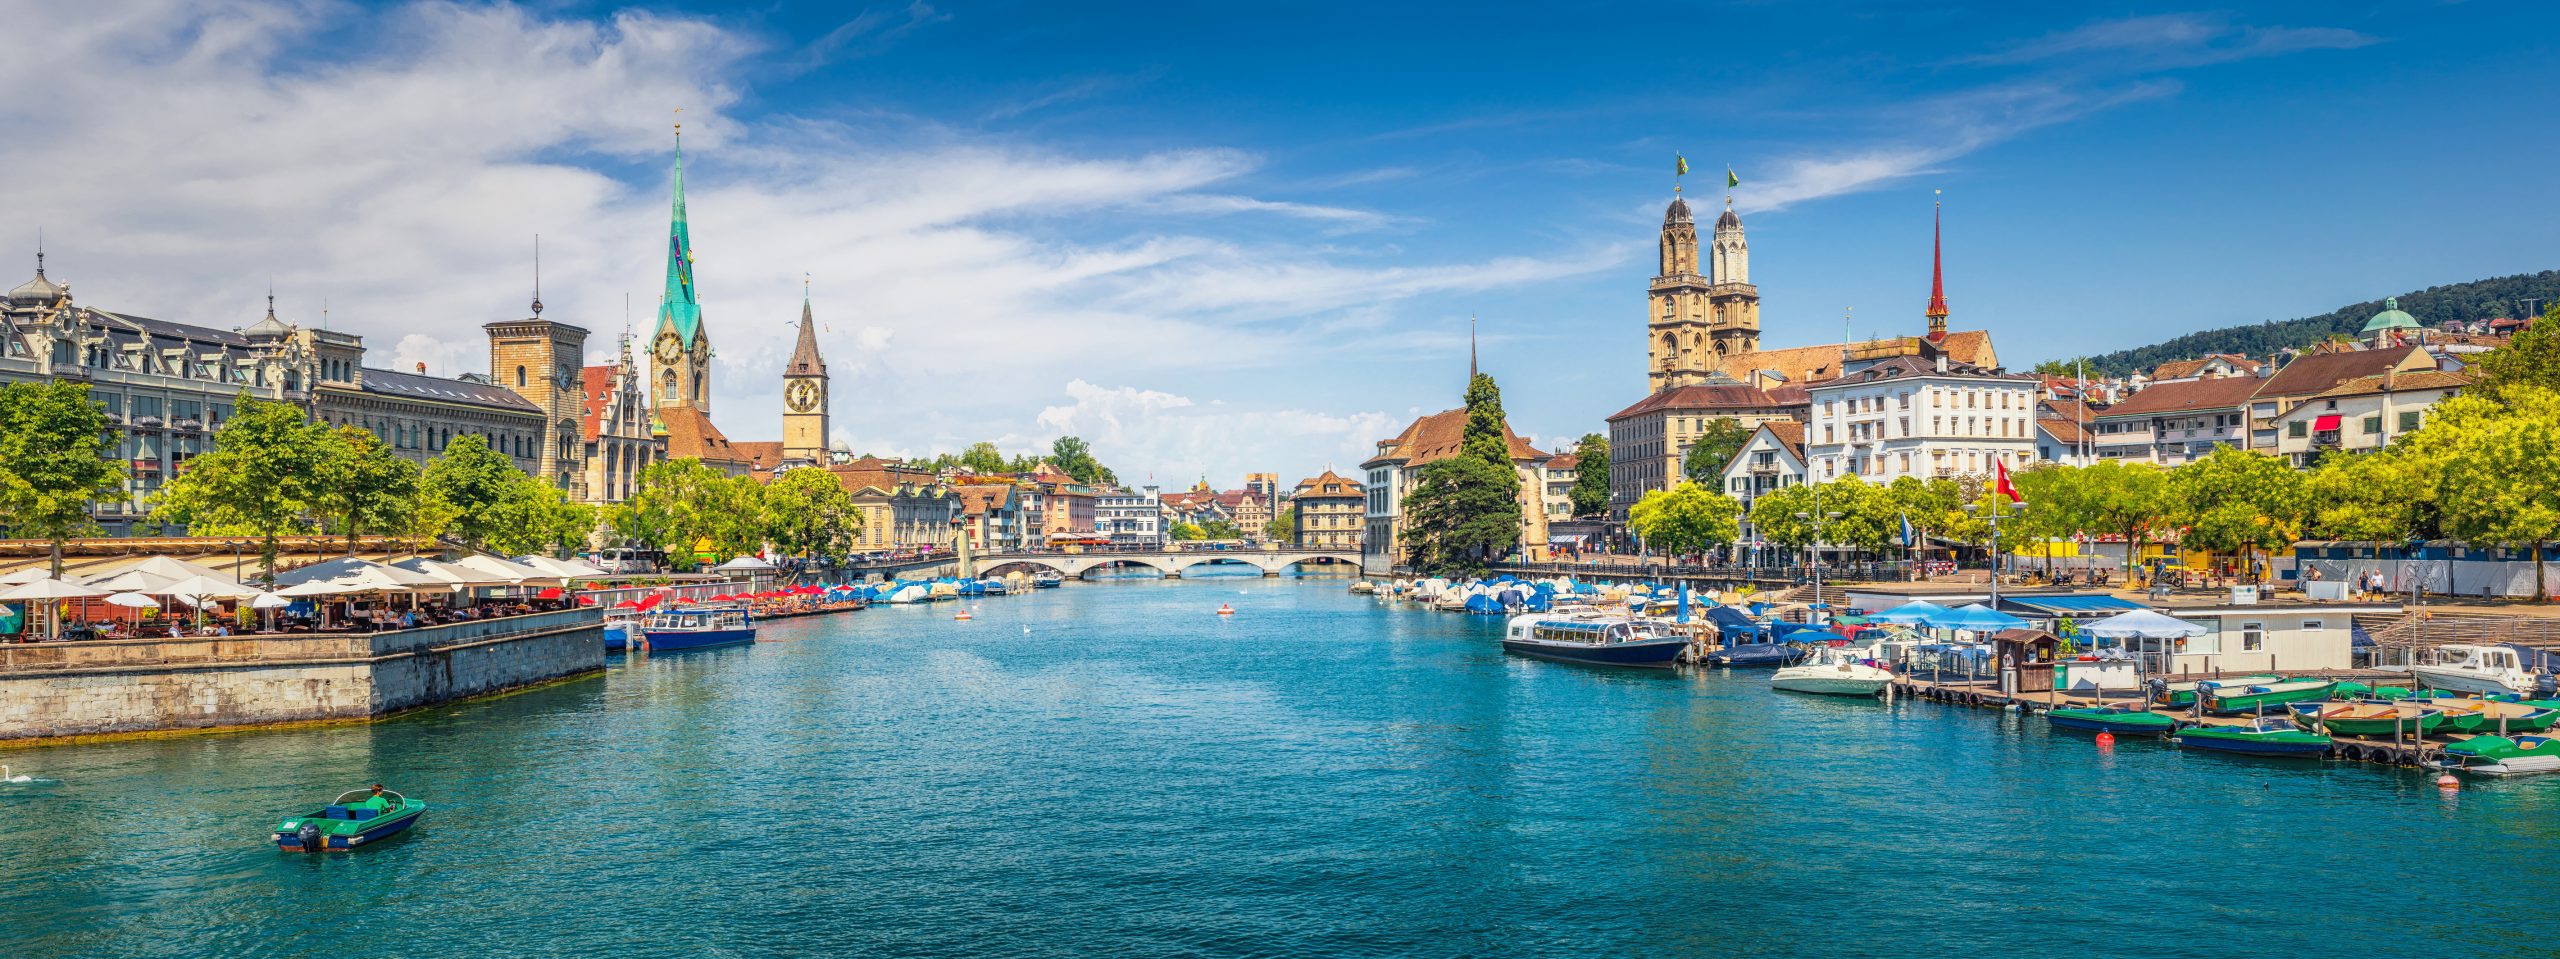 Panoramic,View,Of,Historic,Zurich,City,Center,With,Famous,Fraumunster,